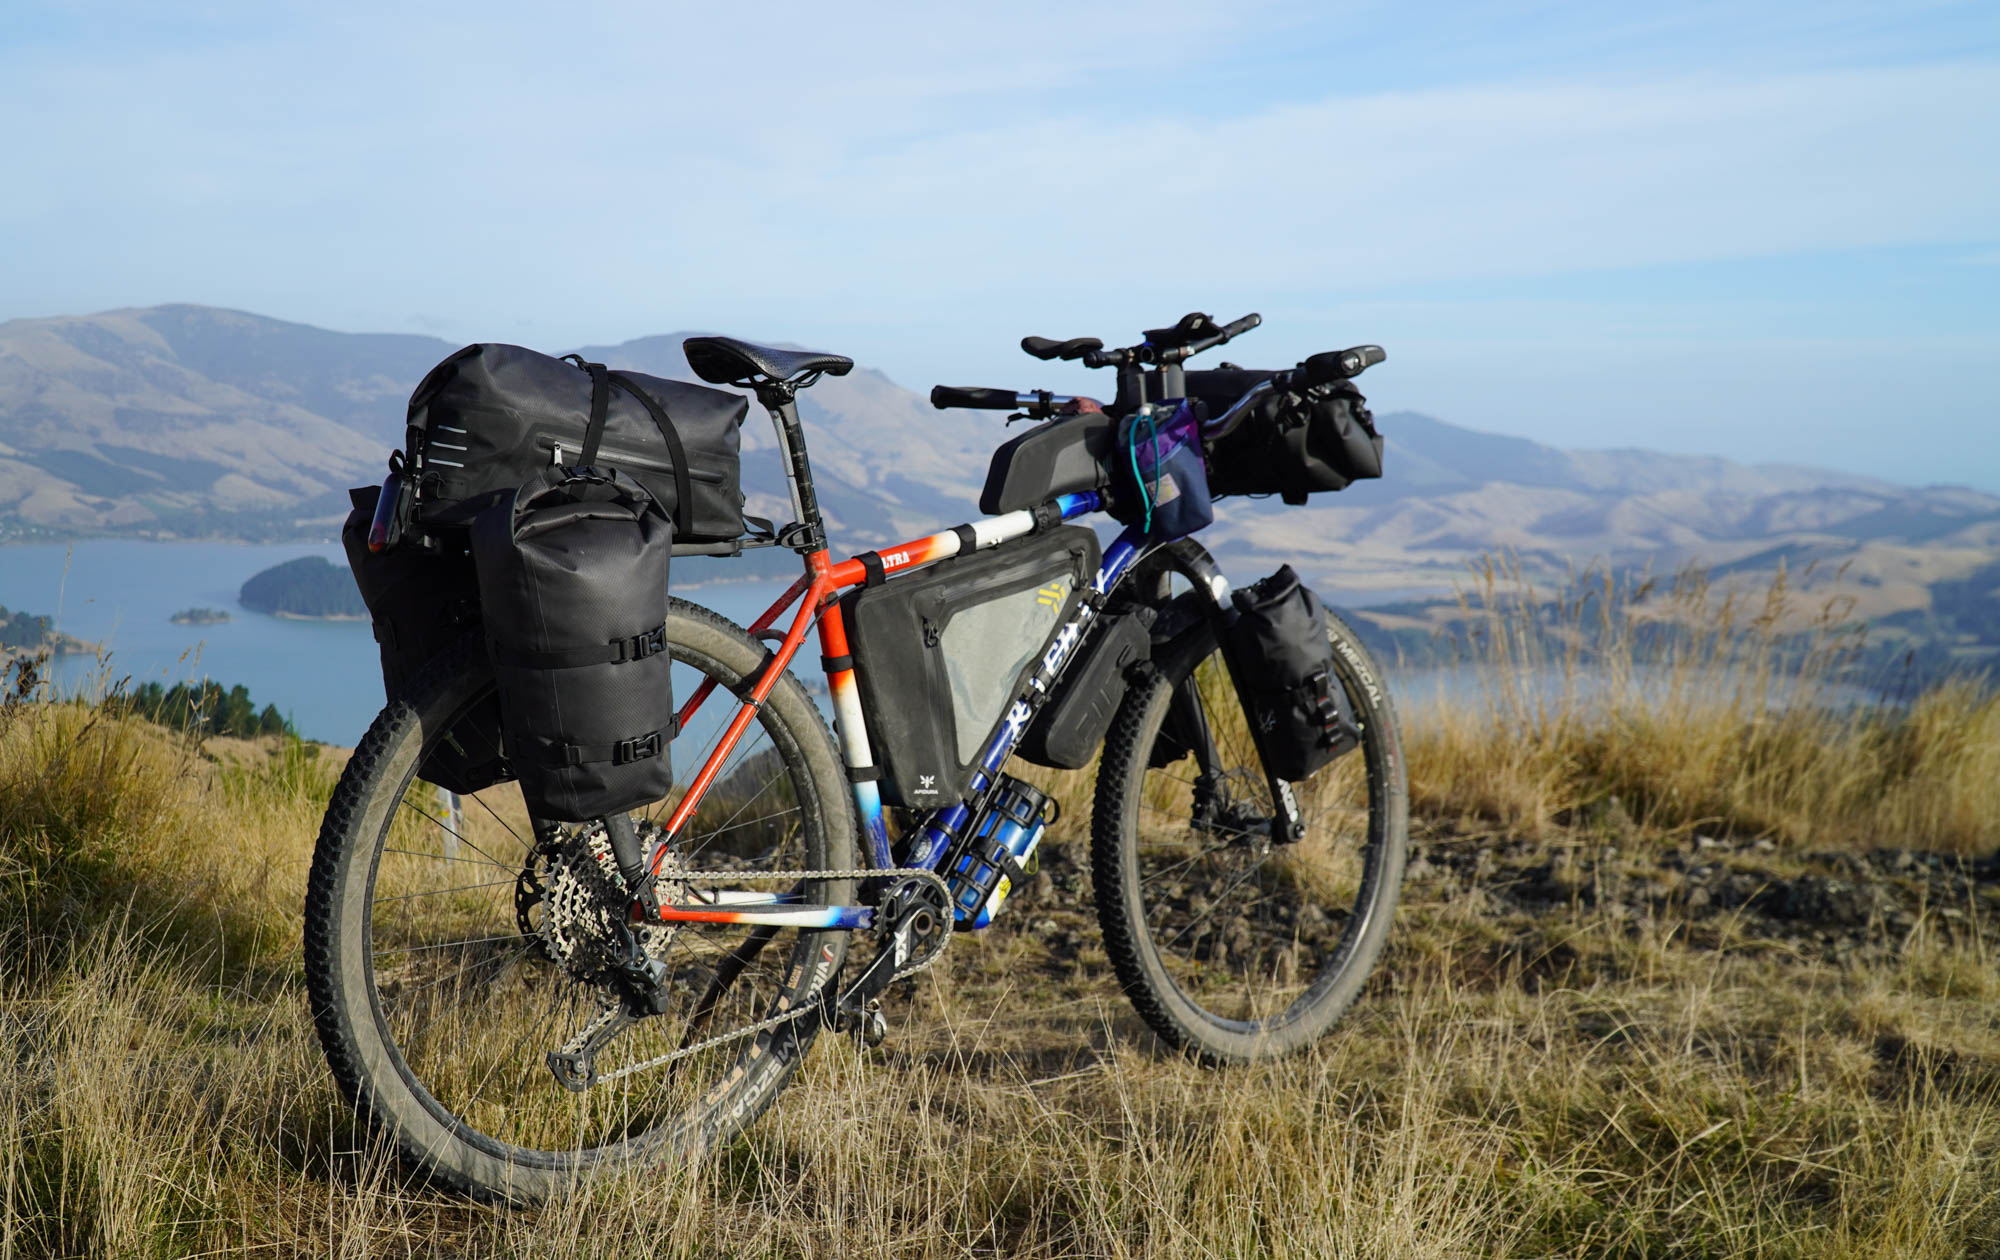 The author's Ritchey mountain bike, fully equipped for loaded bikepacking with a complete complement of frame bags which manage to not quite hide the Ritchey's distinctive red-white-blue fade paint.